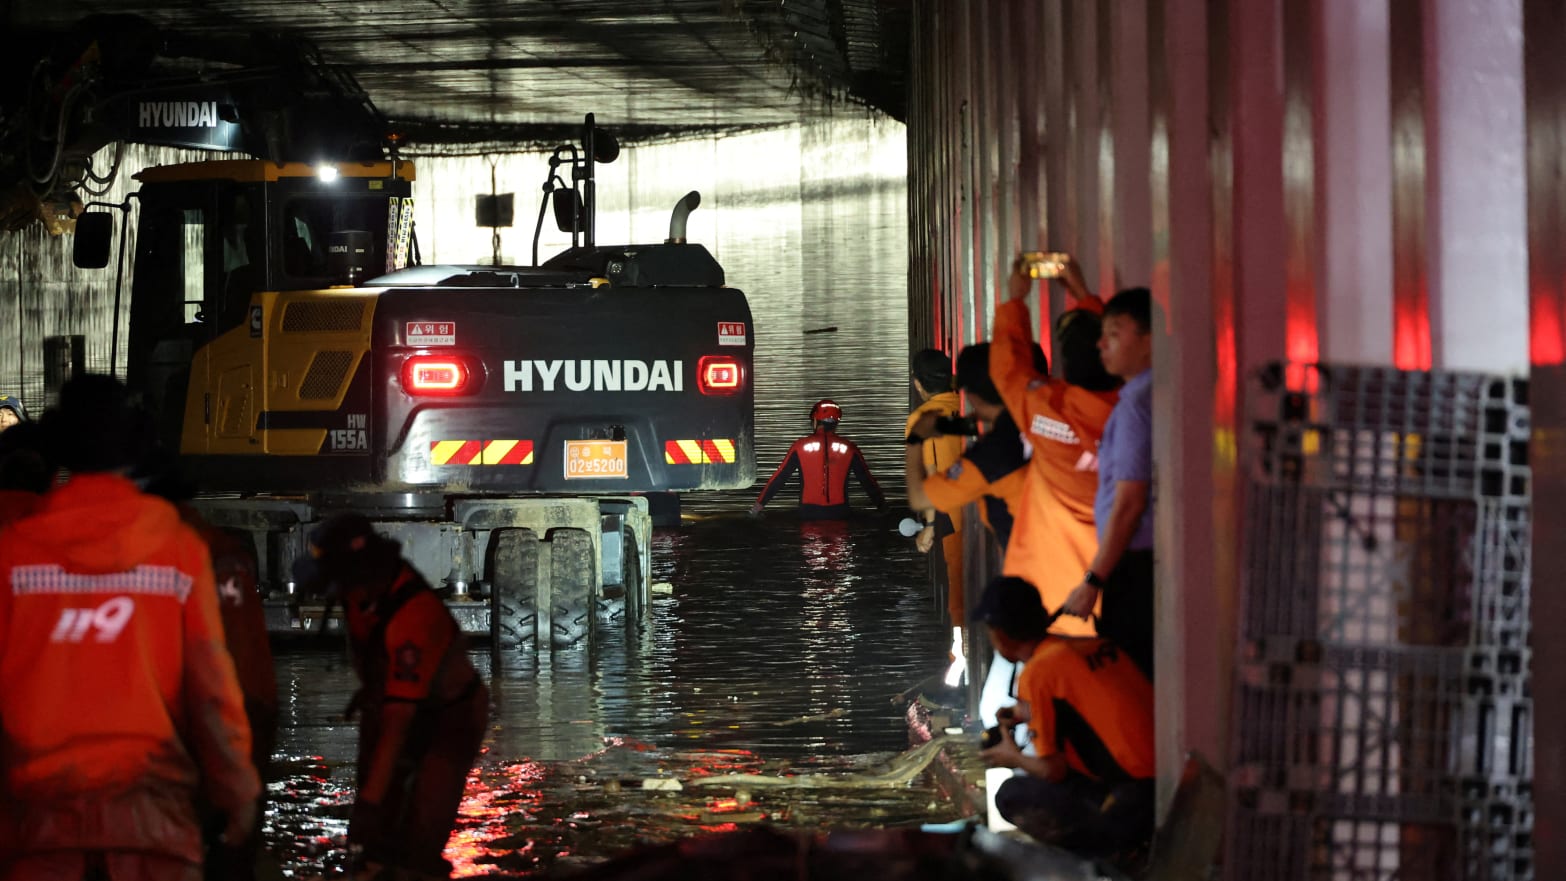 Rescue teams work at a flooded tunnel in Cheongju, South Korea, where at least 13 people died after becoming trapped by flooding.